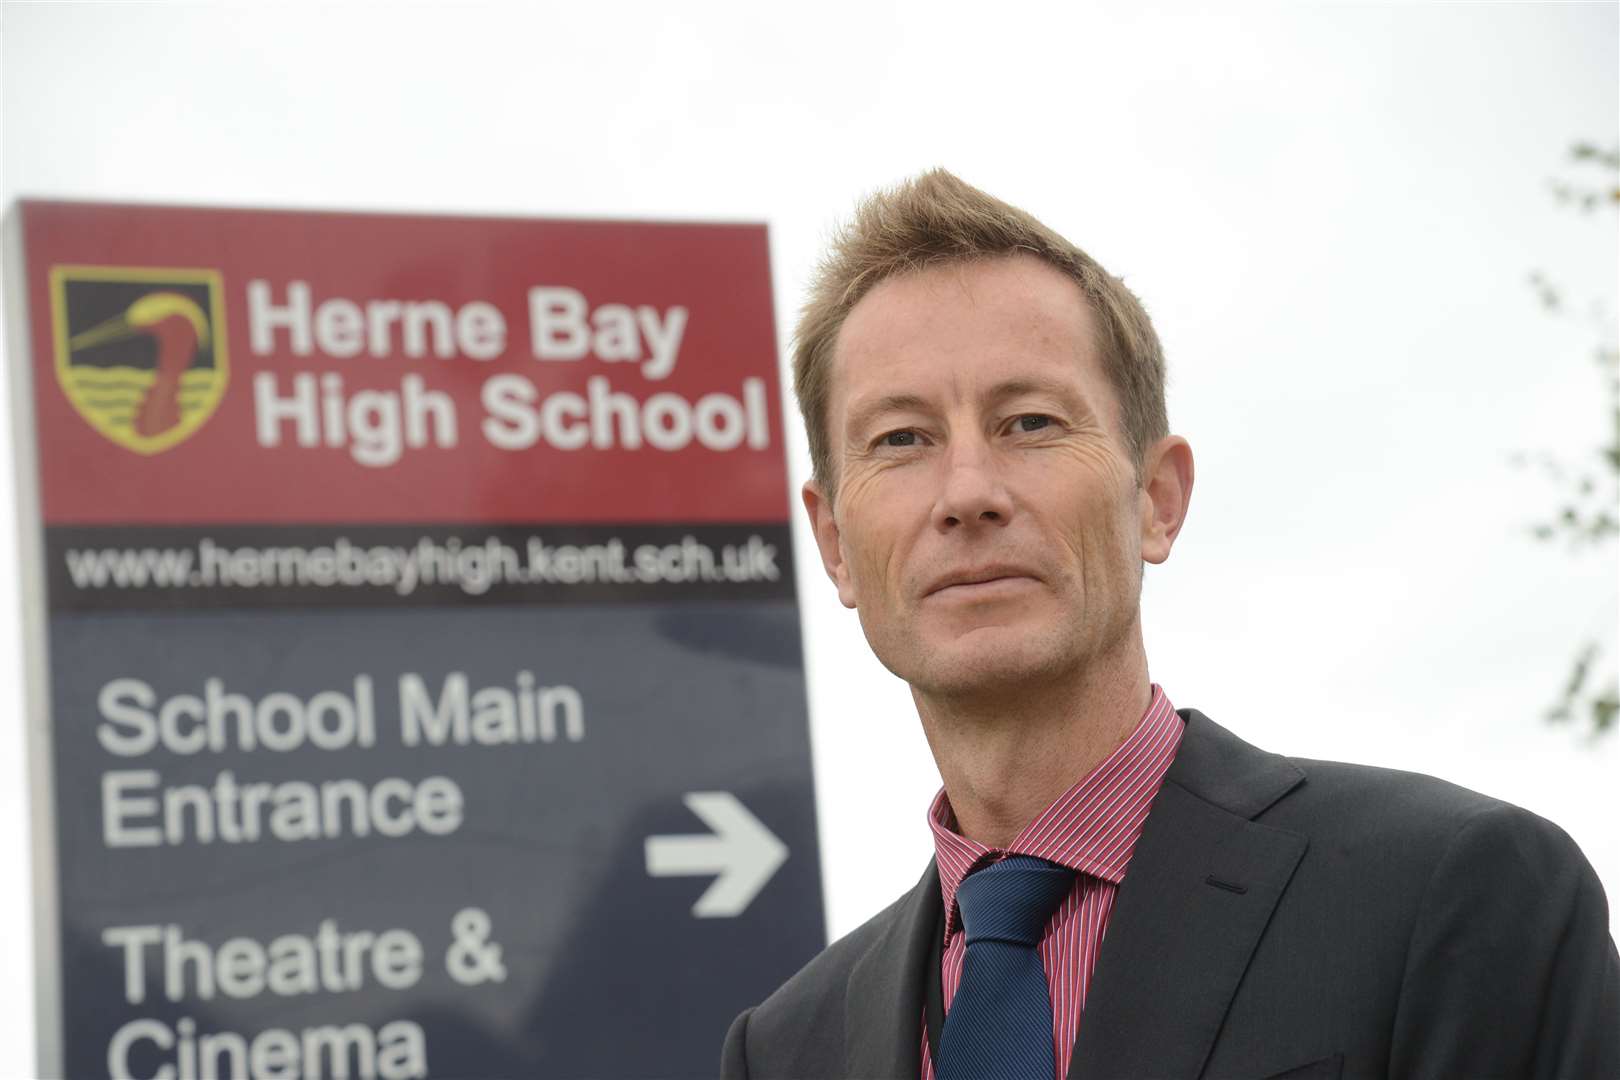 Herne Bay High School principal Jon Boyes is frustrated that plans to expand the secondary have been delayed